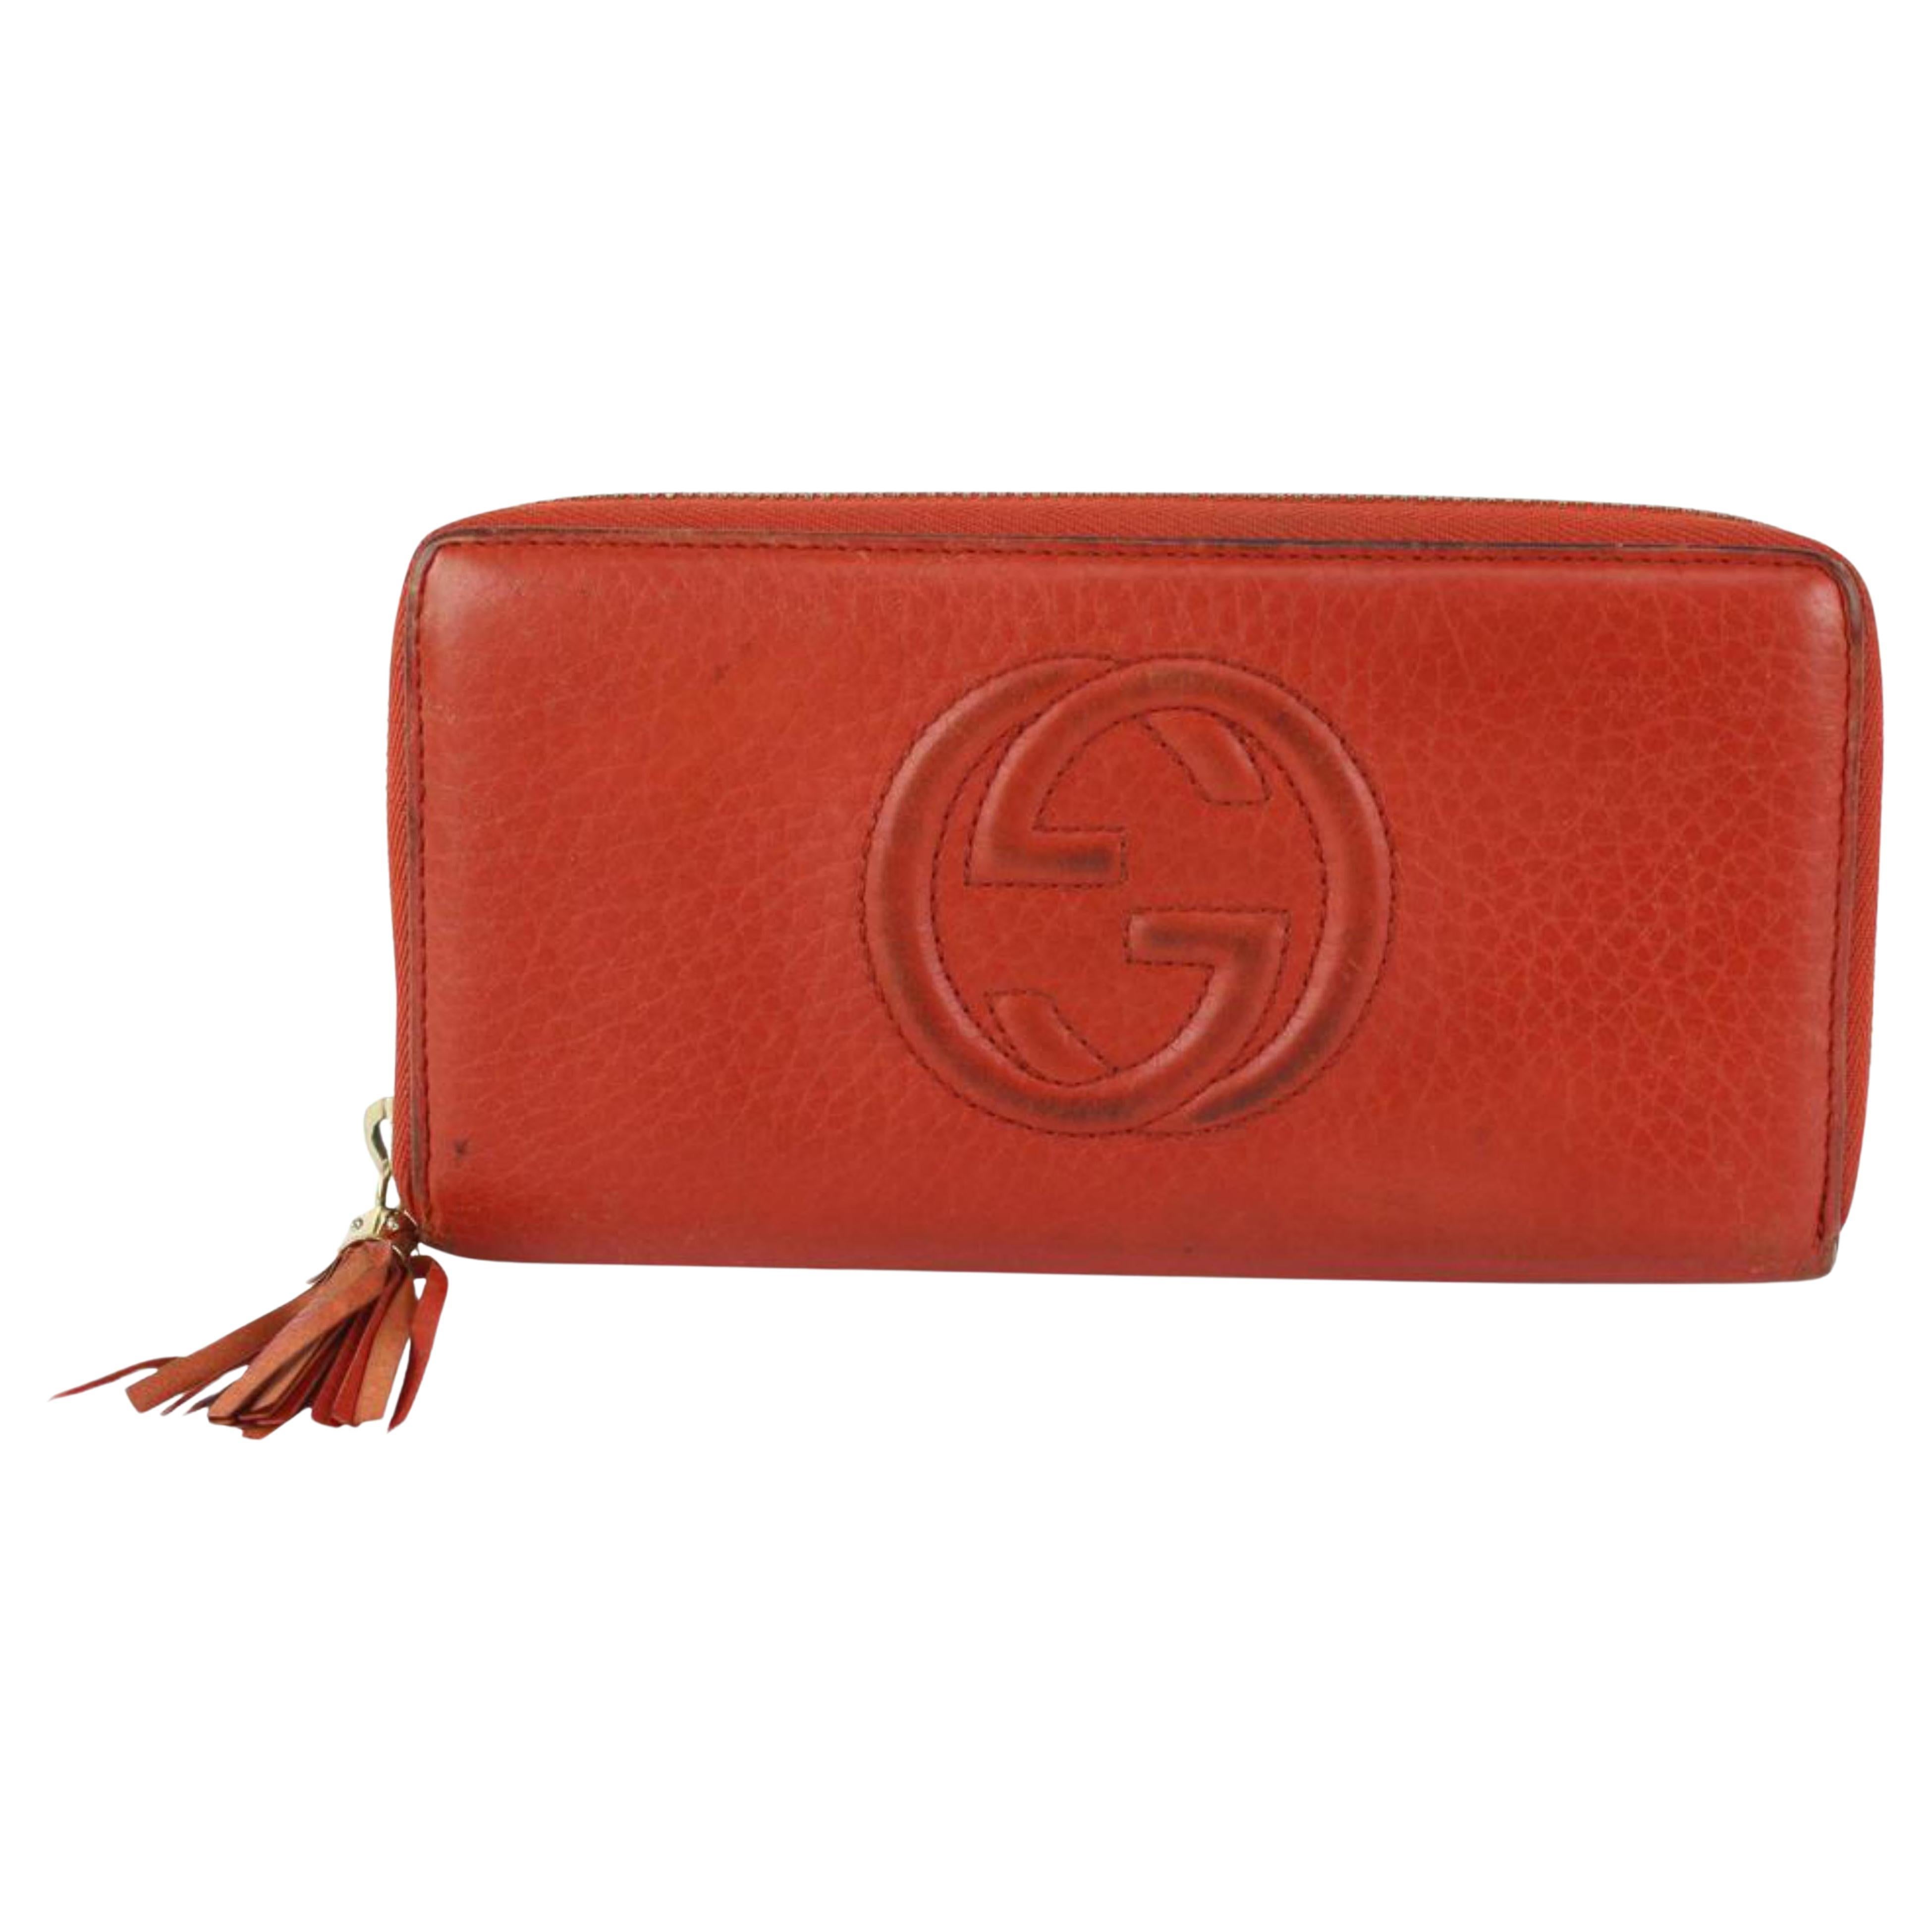 Gucci Red Leather Fringe Tassel Soho Zip Around Continental Wallet 1G1014 For Sale